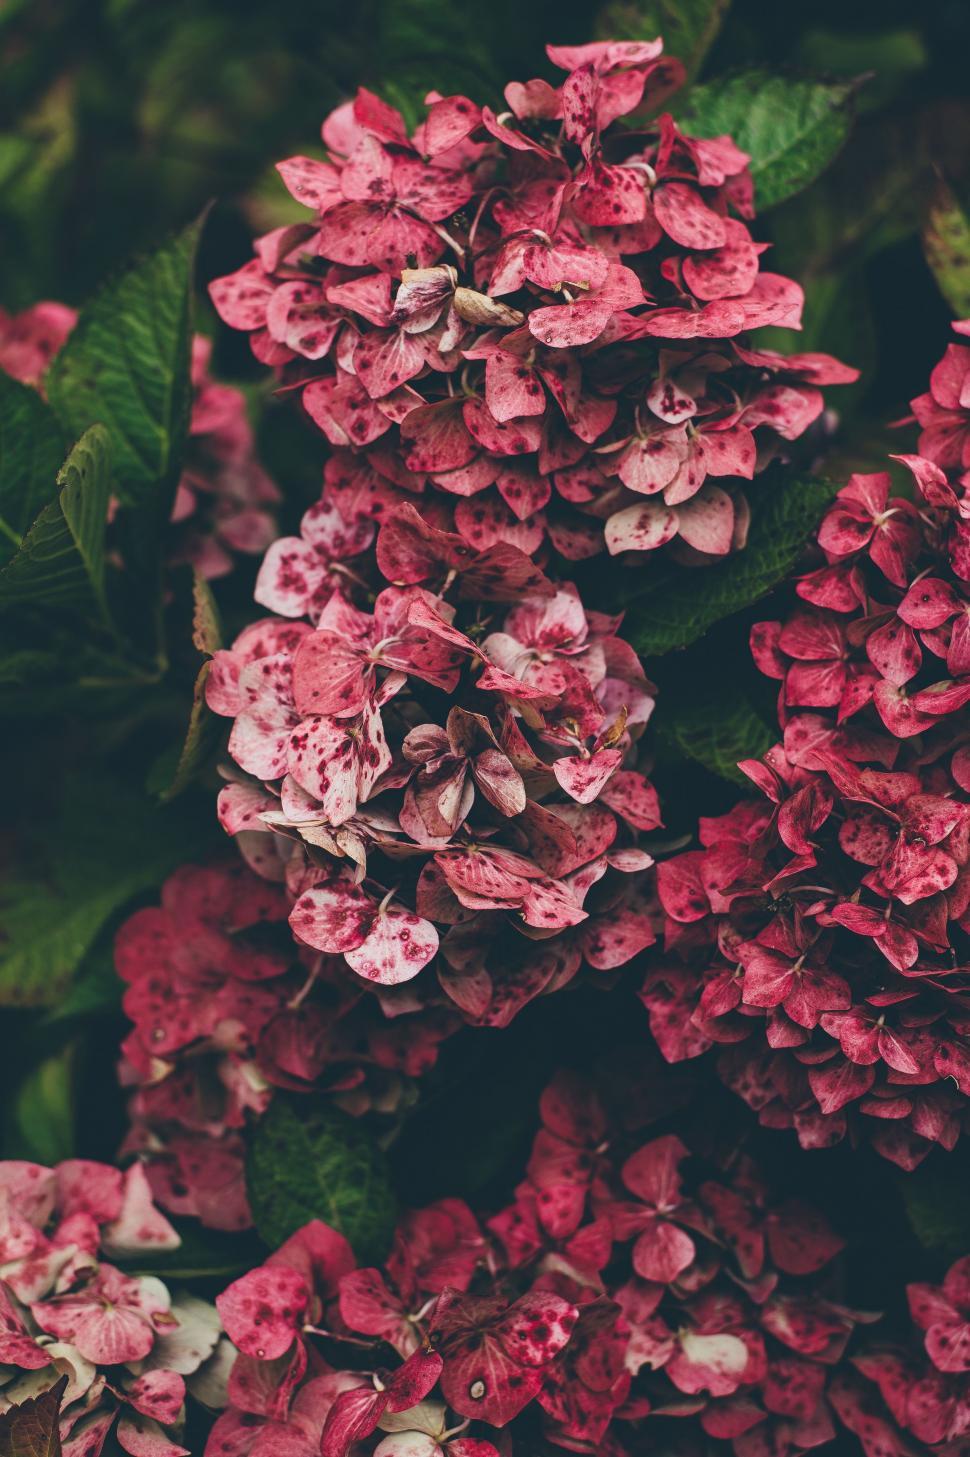 Free Image of Cluster of Pink Flowers With Green Leaves 